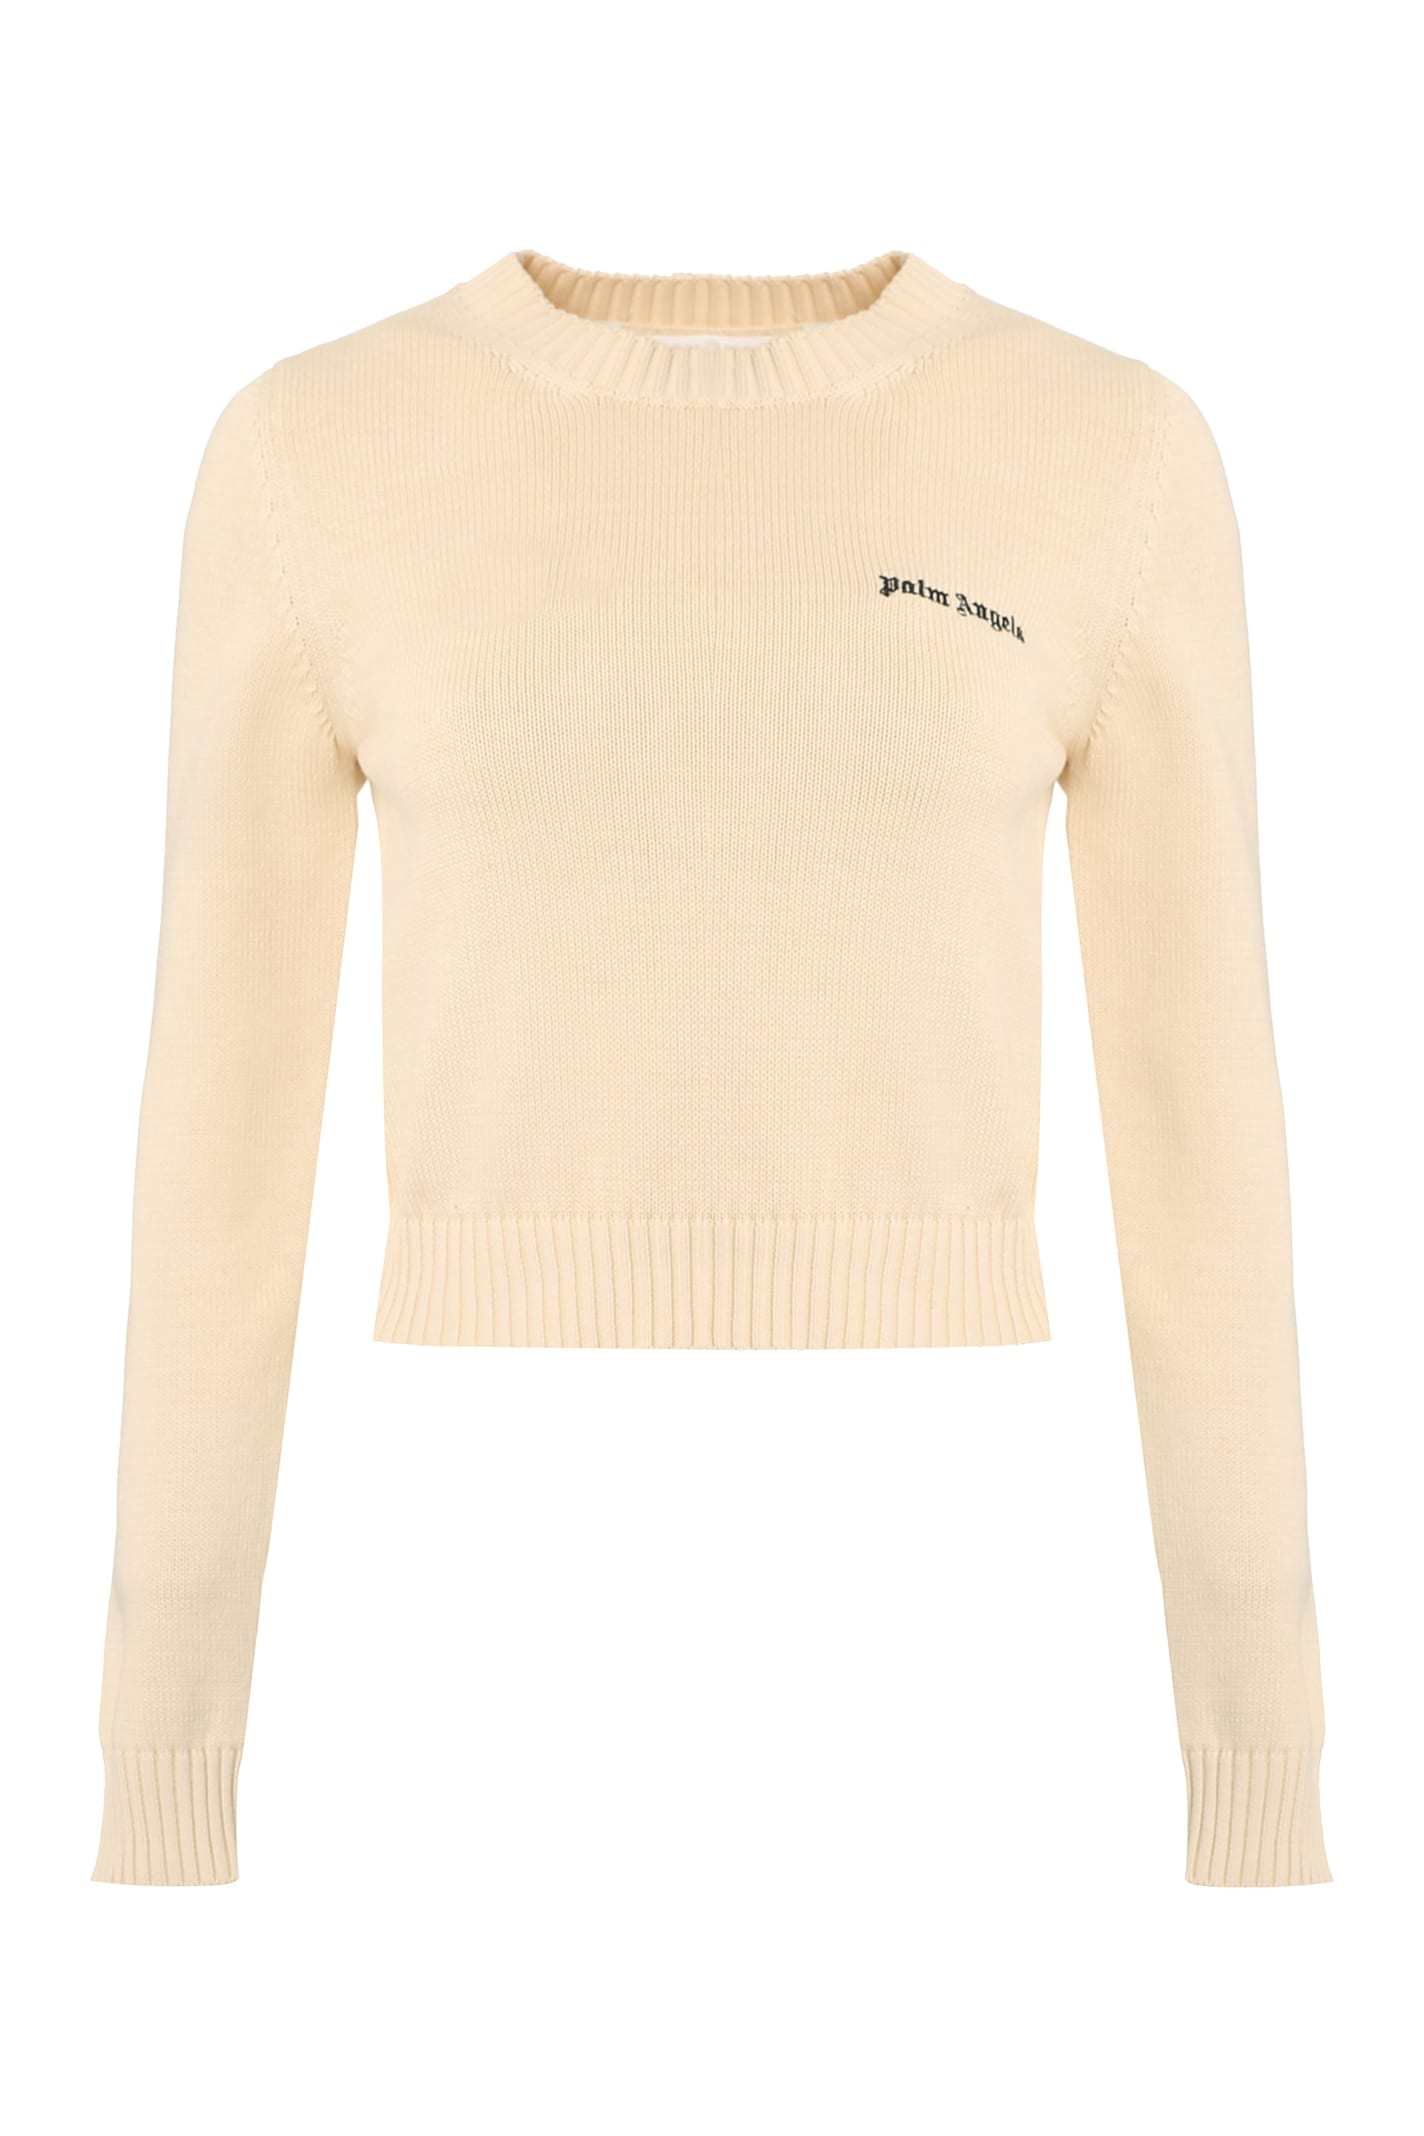 Palm Angels Logo Embroidered Crewneck Knitted Jumper